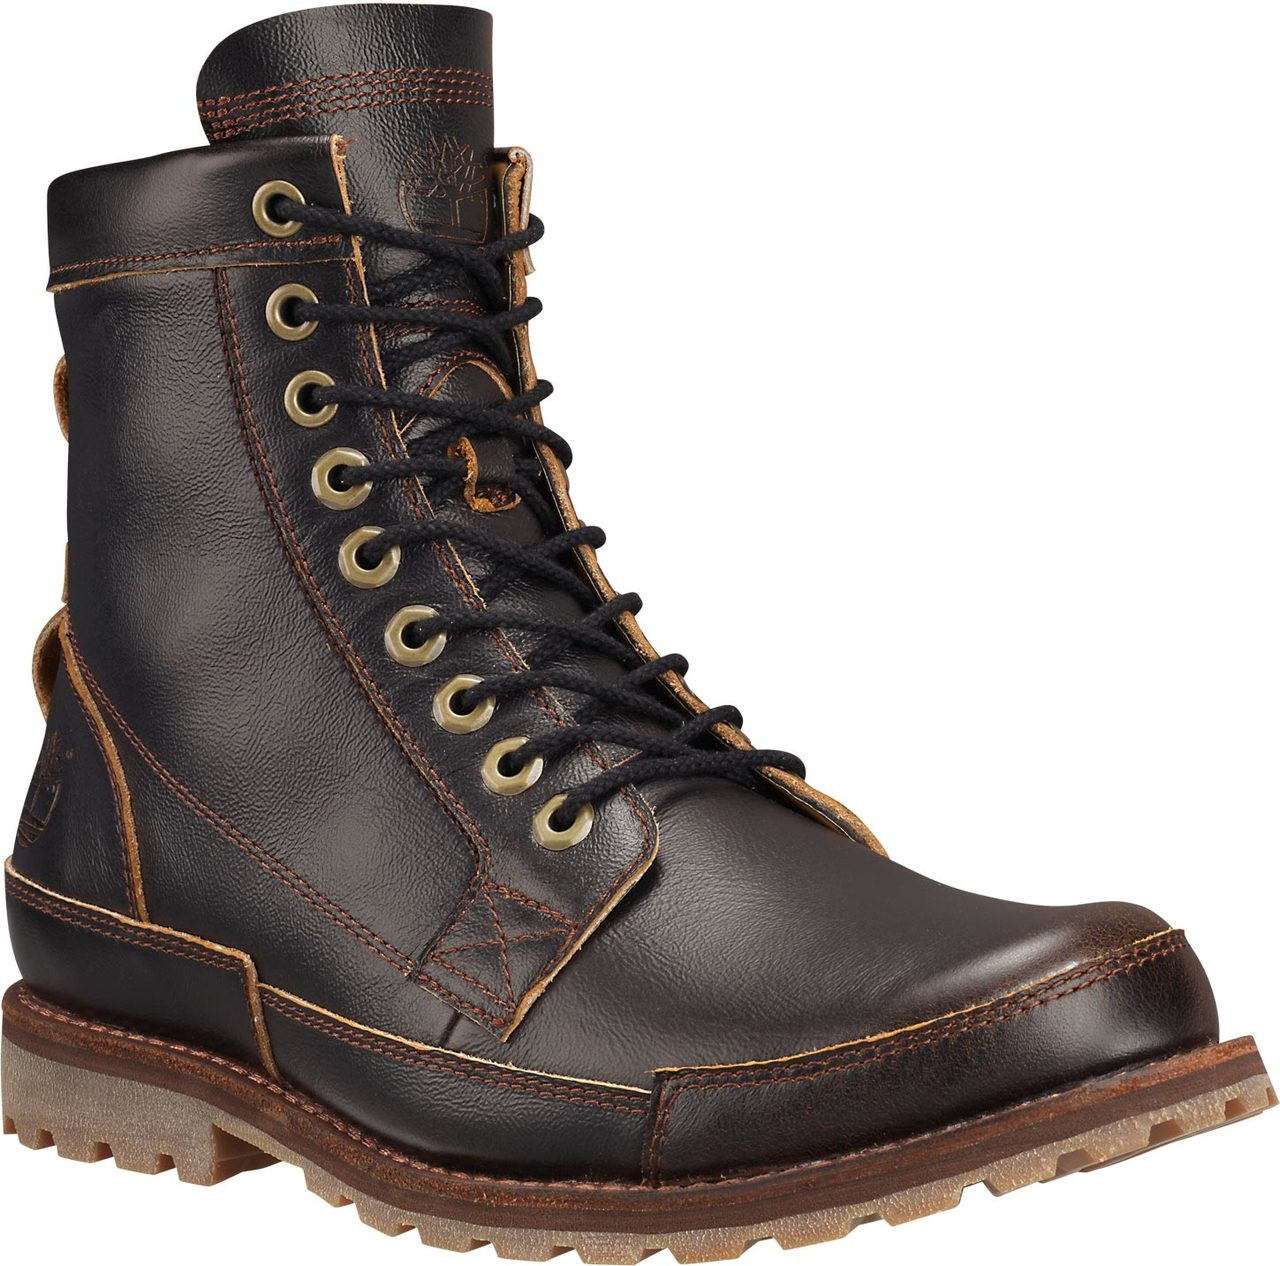 Timberland Men's Earthkeepers Original Leather 6-Inch